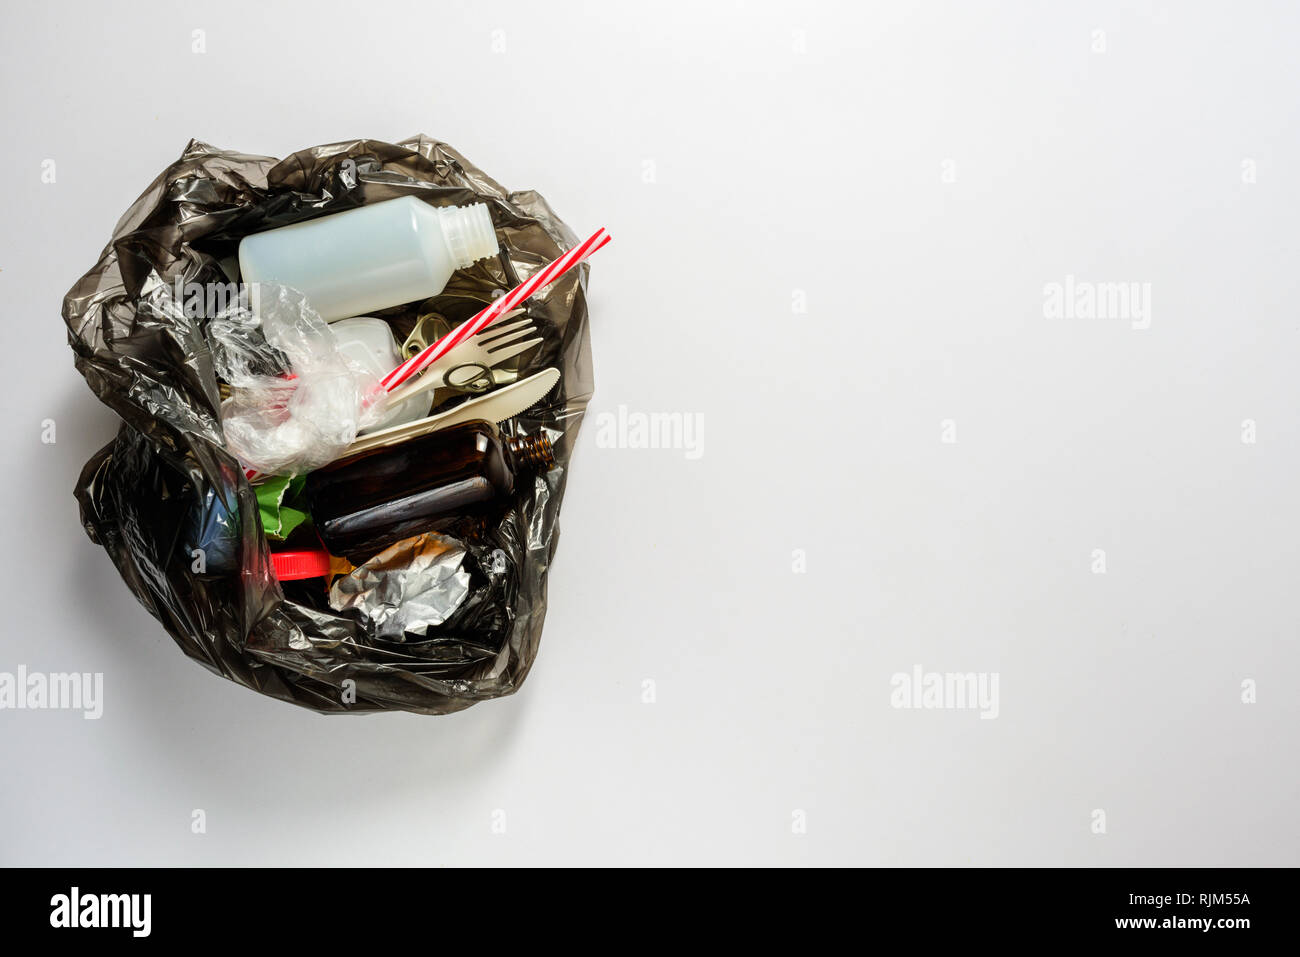 Unsorted Garbage in plastic bag. Recycle concept Stock Photo